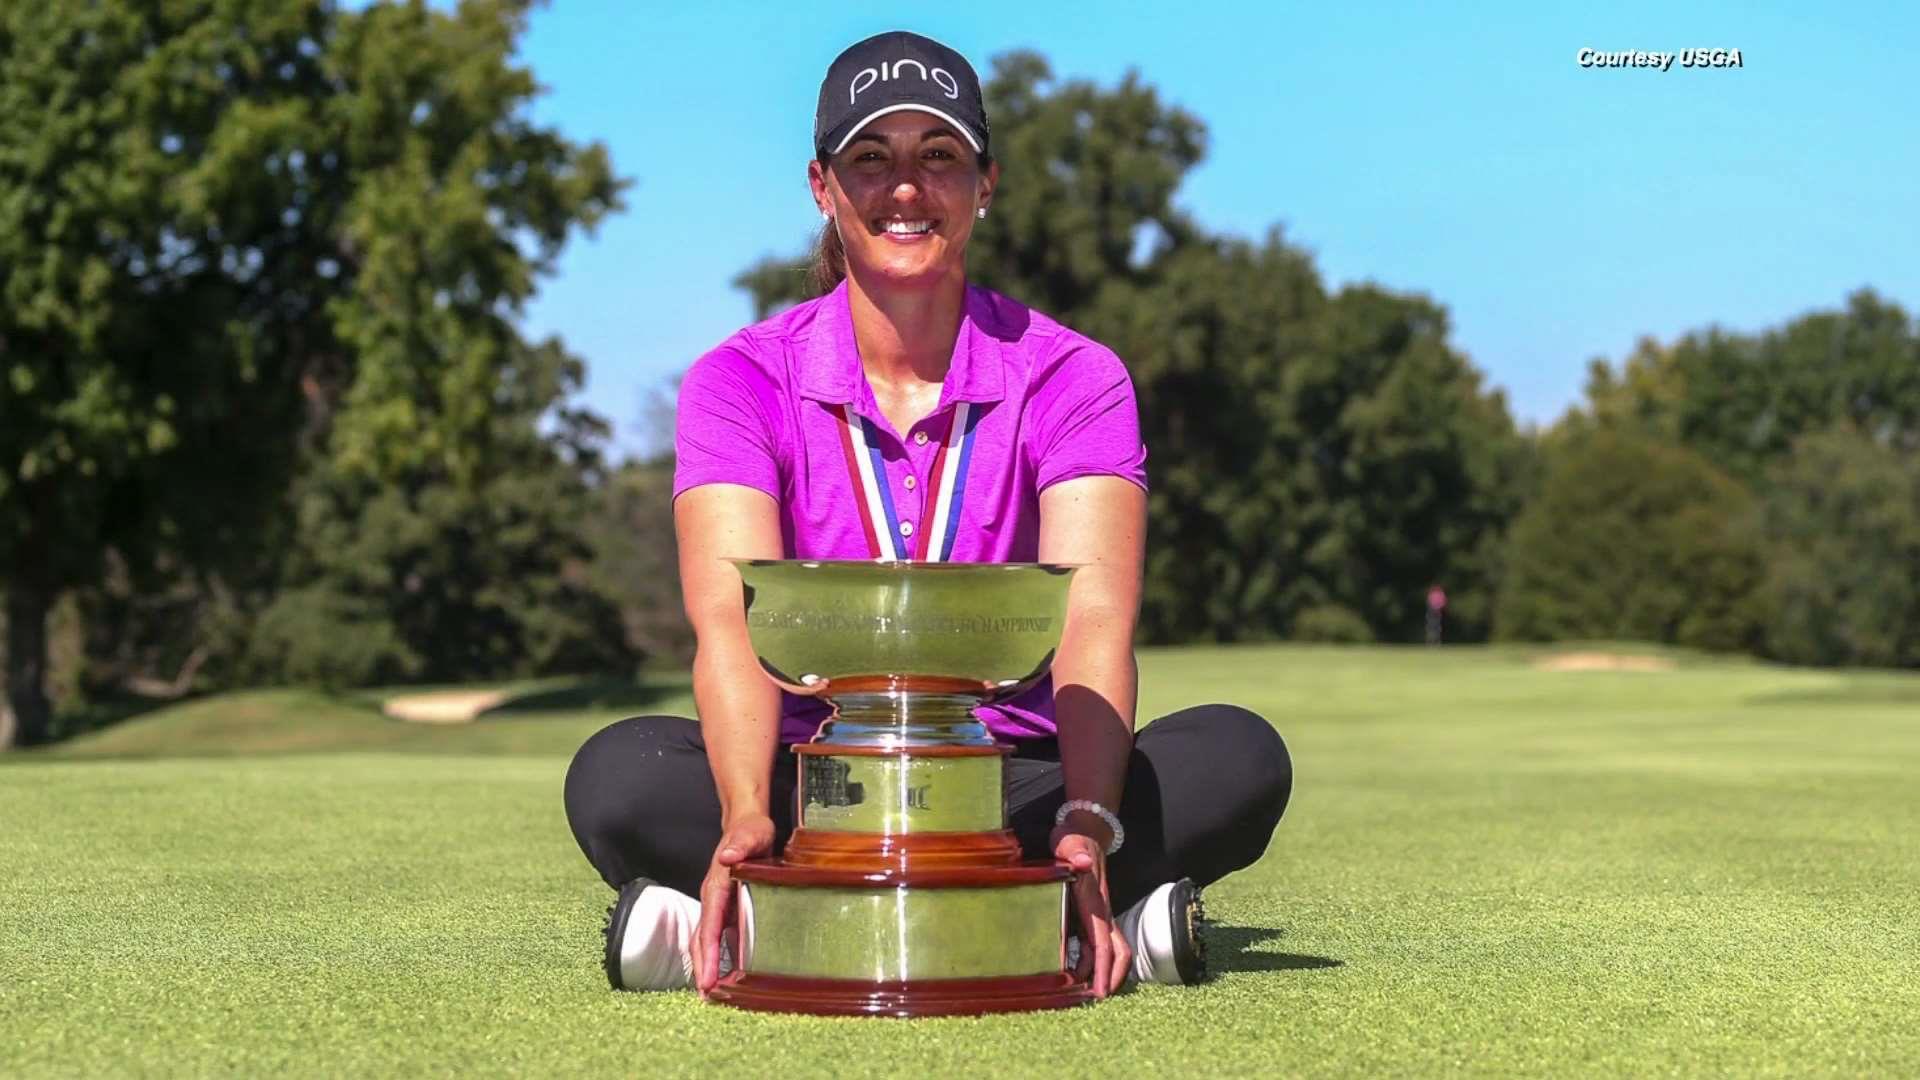 ShannonJohnsonJohnson-is-a-National-Amateur-Champion-image